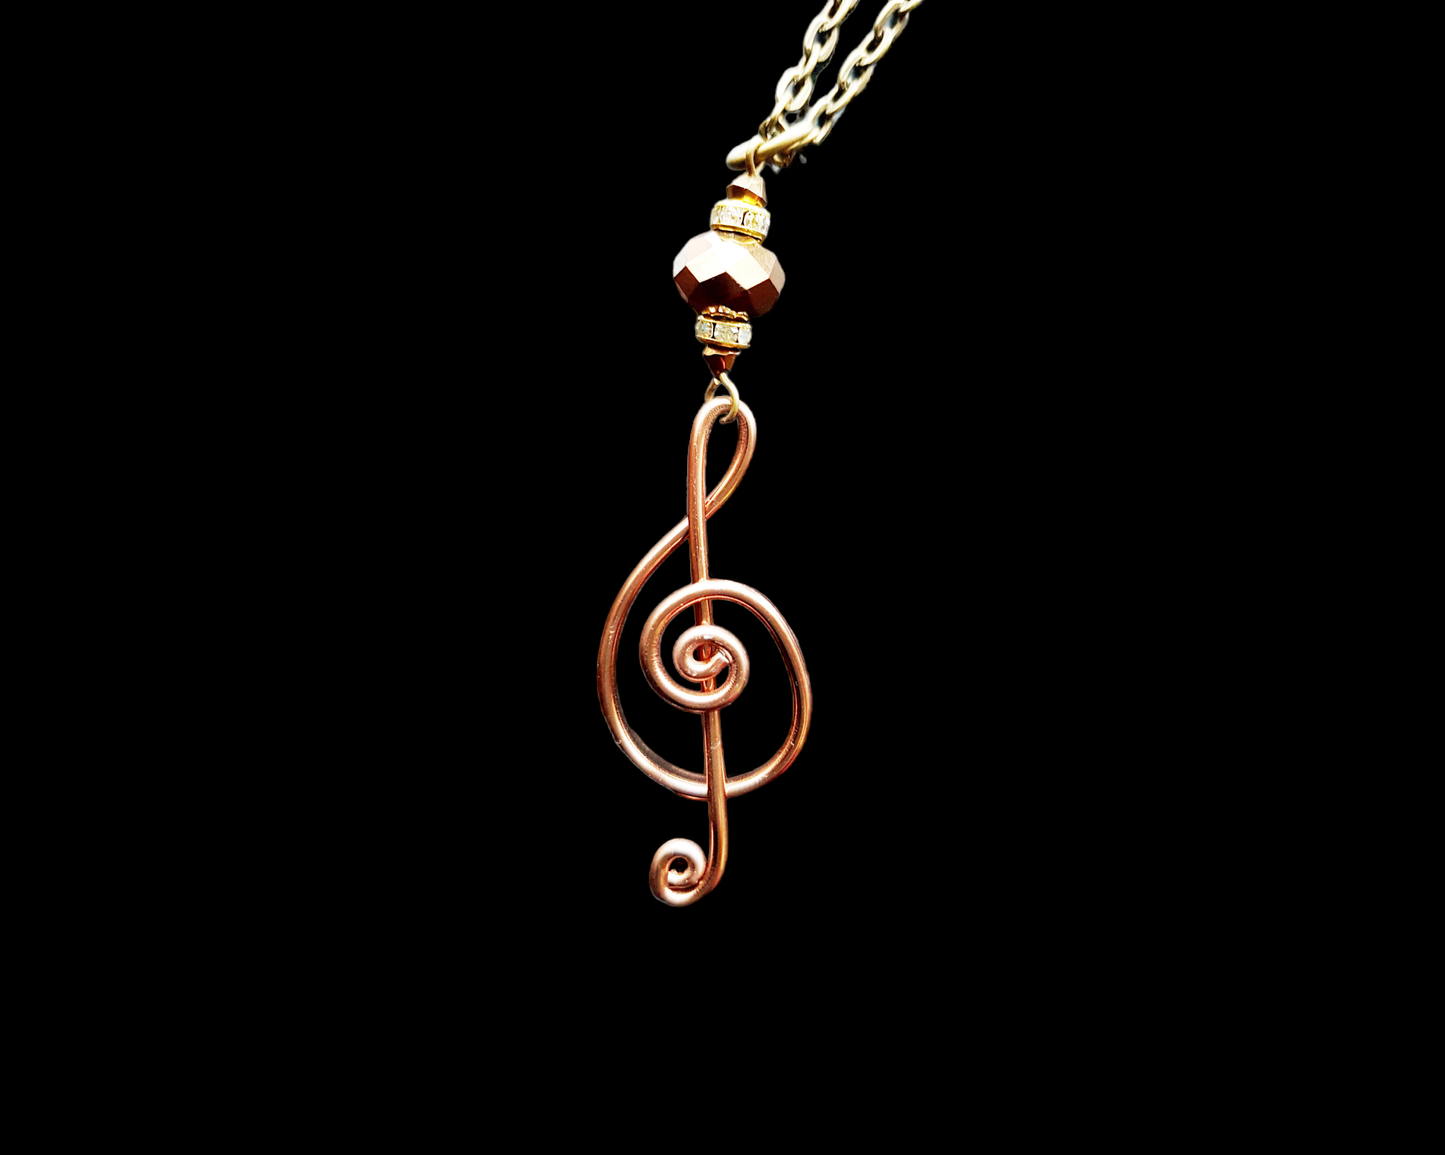 Warm Romance Treble Clef Pendant Necklace with Bronze Treble cleft, Gold Crystal, on a Long Chain